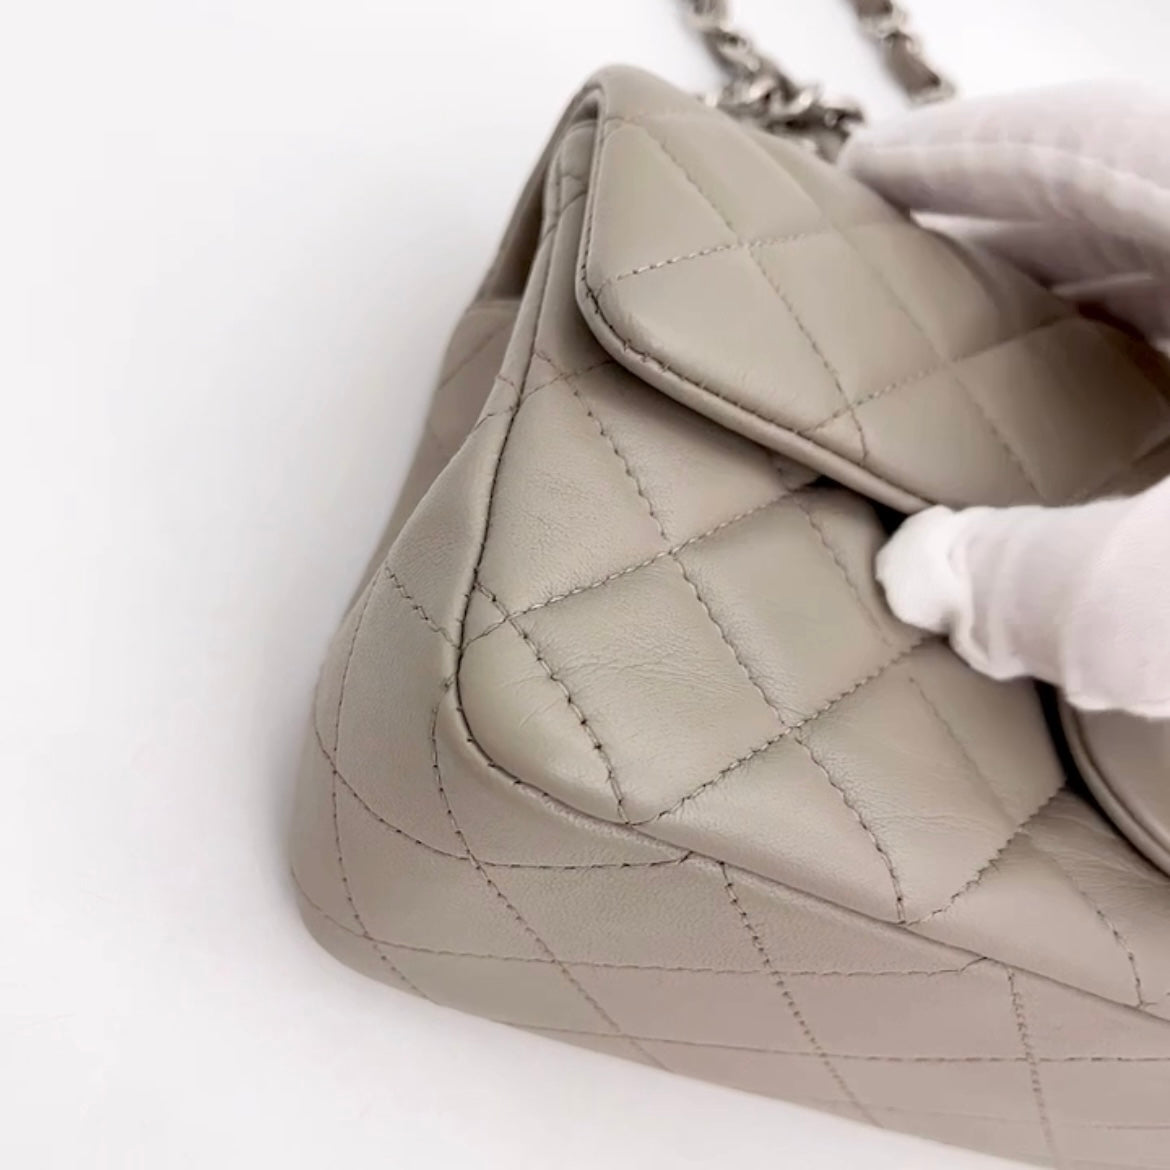 Chanel Classic Flap – The Preloved Bag Boutique